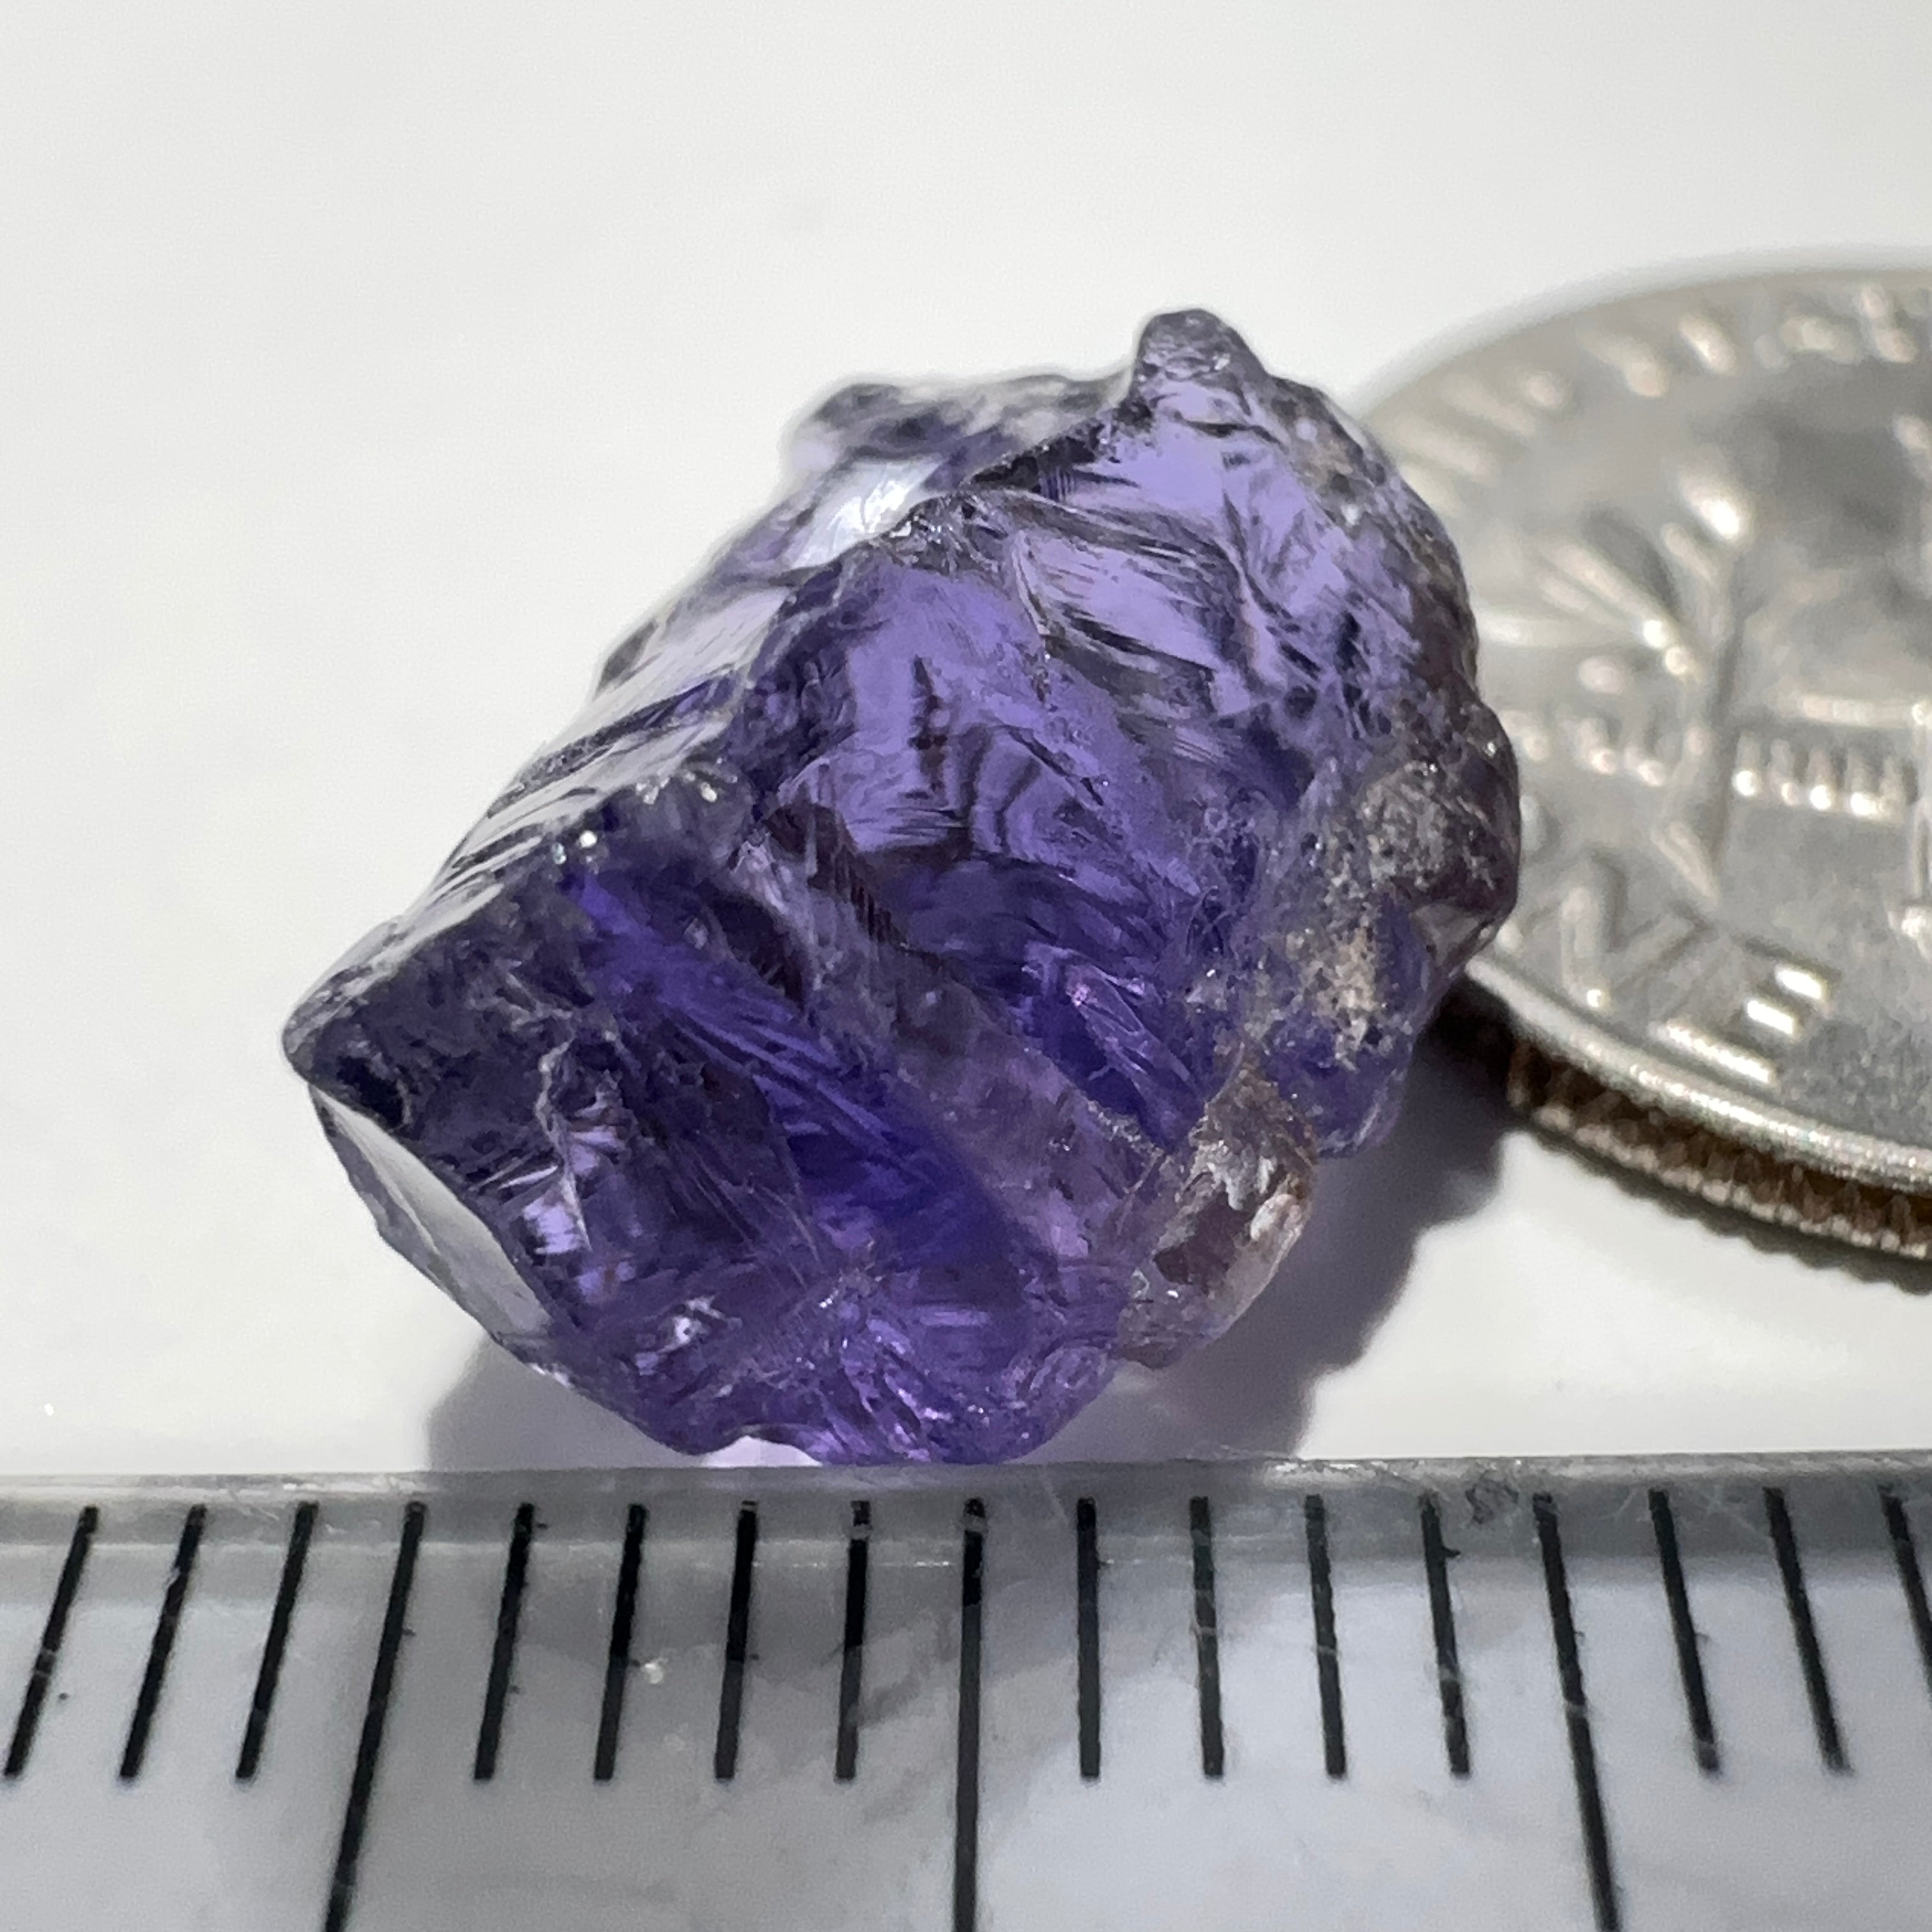 5.10ct Purple Scapolite Crystal, Tanzania, Untreated Untreated, slight issues on the skin, VVS-IF clean